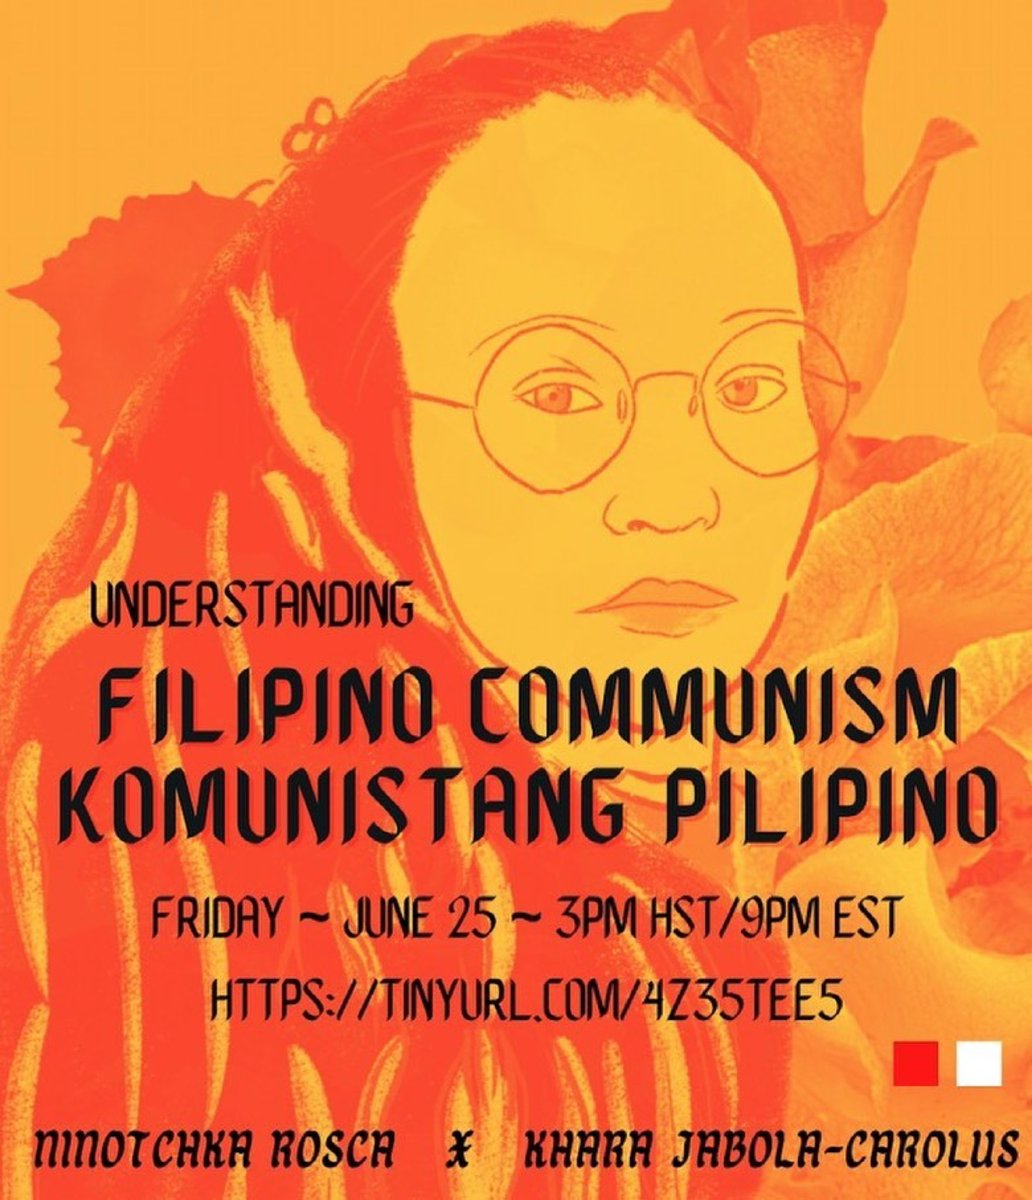 US imperialism and anti-communism are one project. Come learn about the transnational history of US empire from Filipino voices and how the Philippines became the model for anti-communist US foreign policy in Asia & the Pacific. This Friday on Zoom: tinyurl.com/4z35tee5